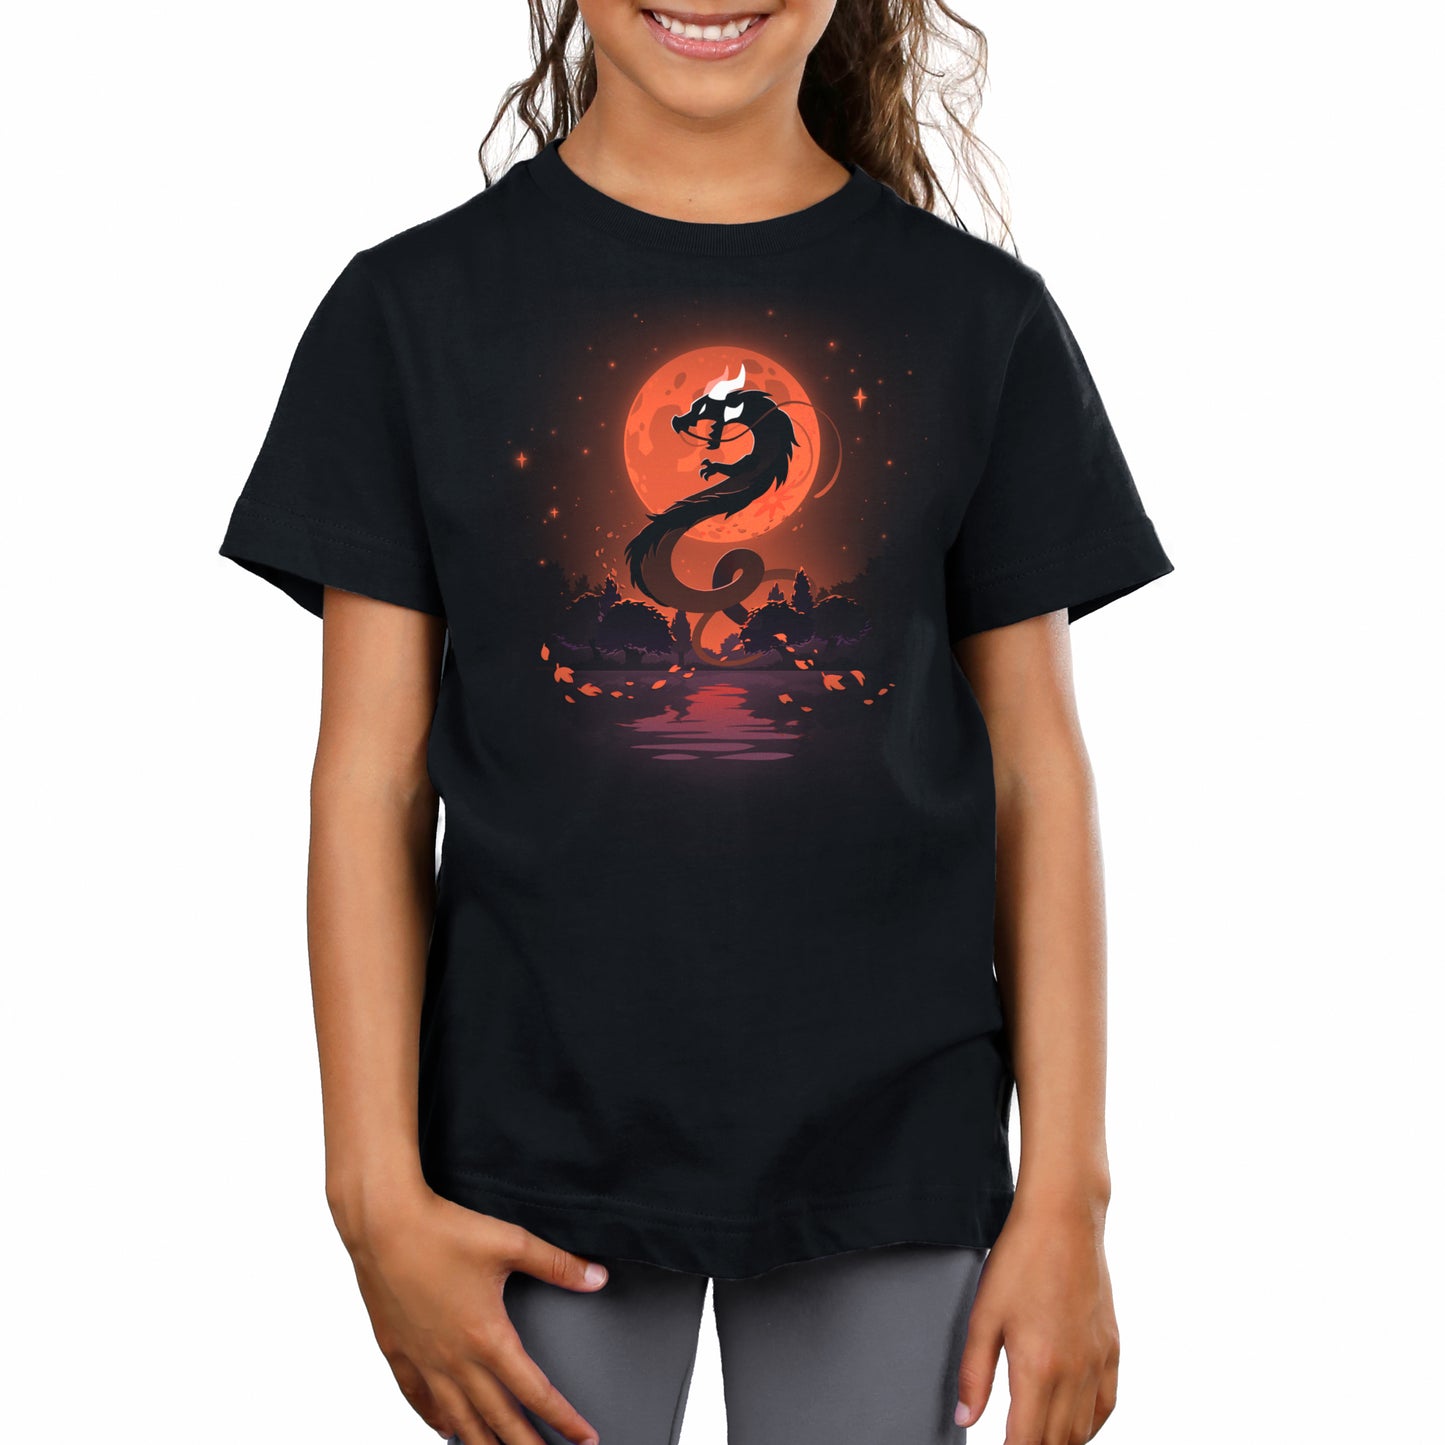 A girl wearing a black t-shirt with an image of Blood Moon Dragon on it from TeeTurtle.